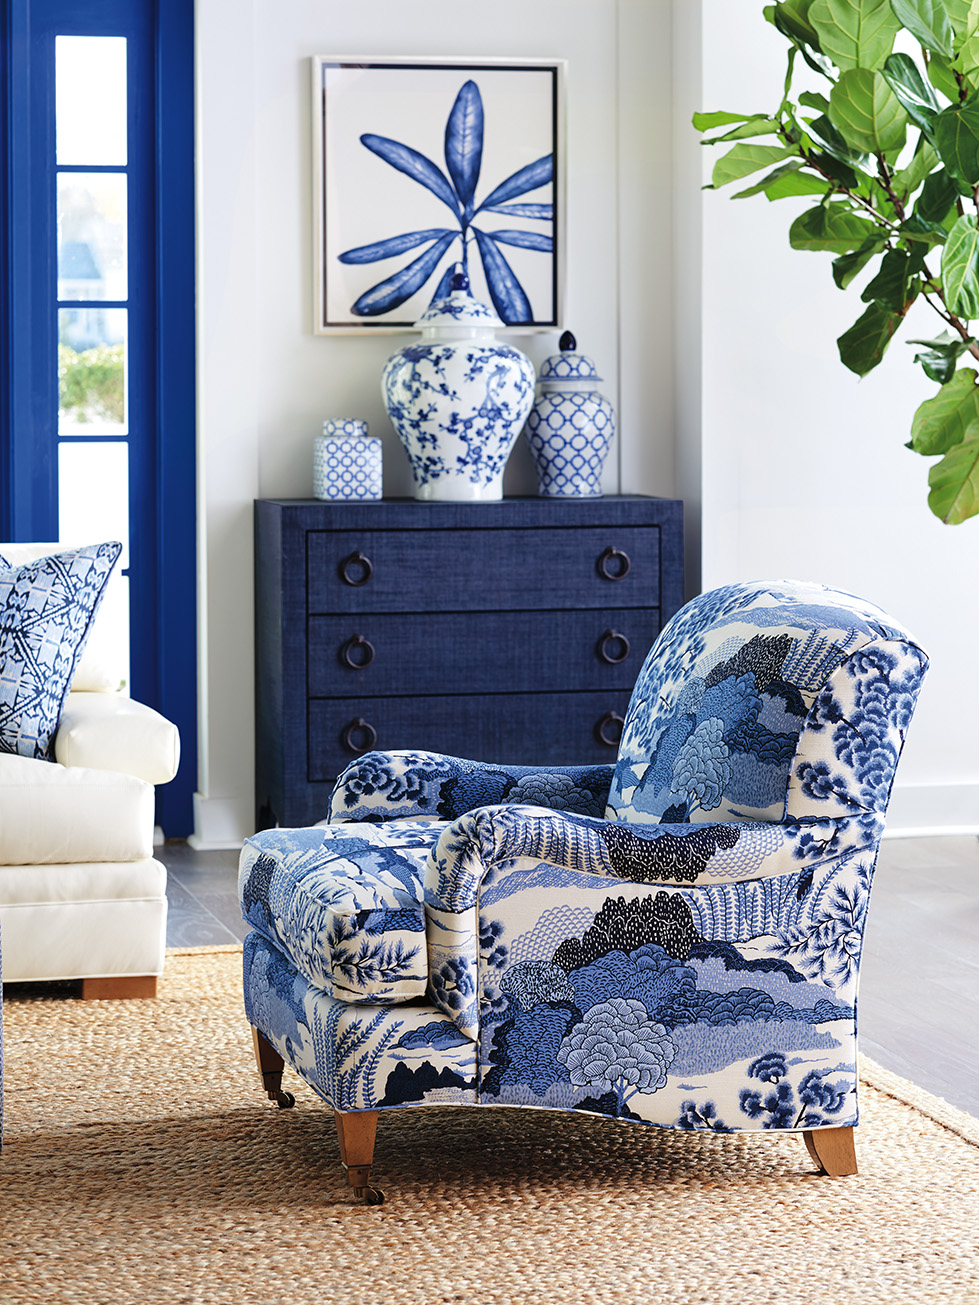 a blue and white chair in a living room